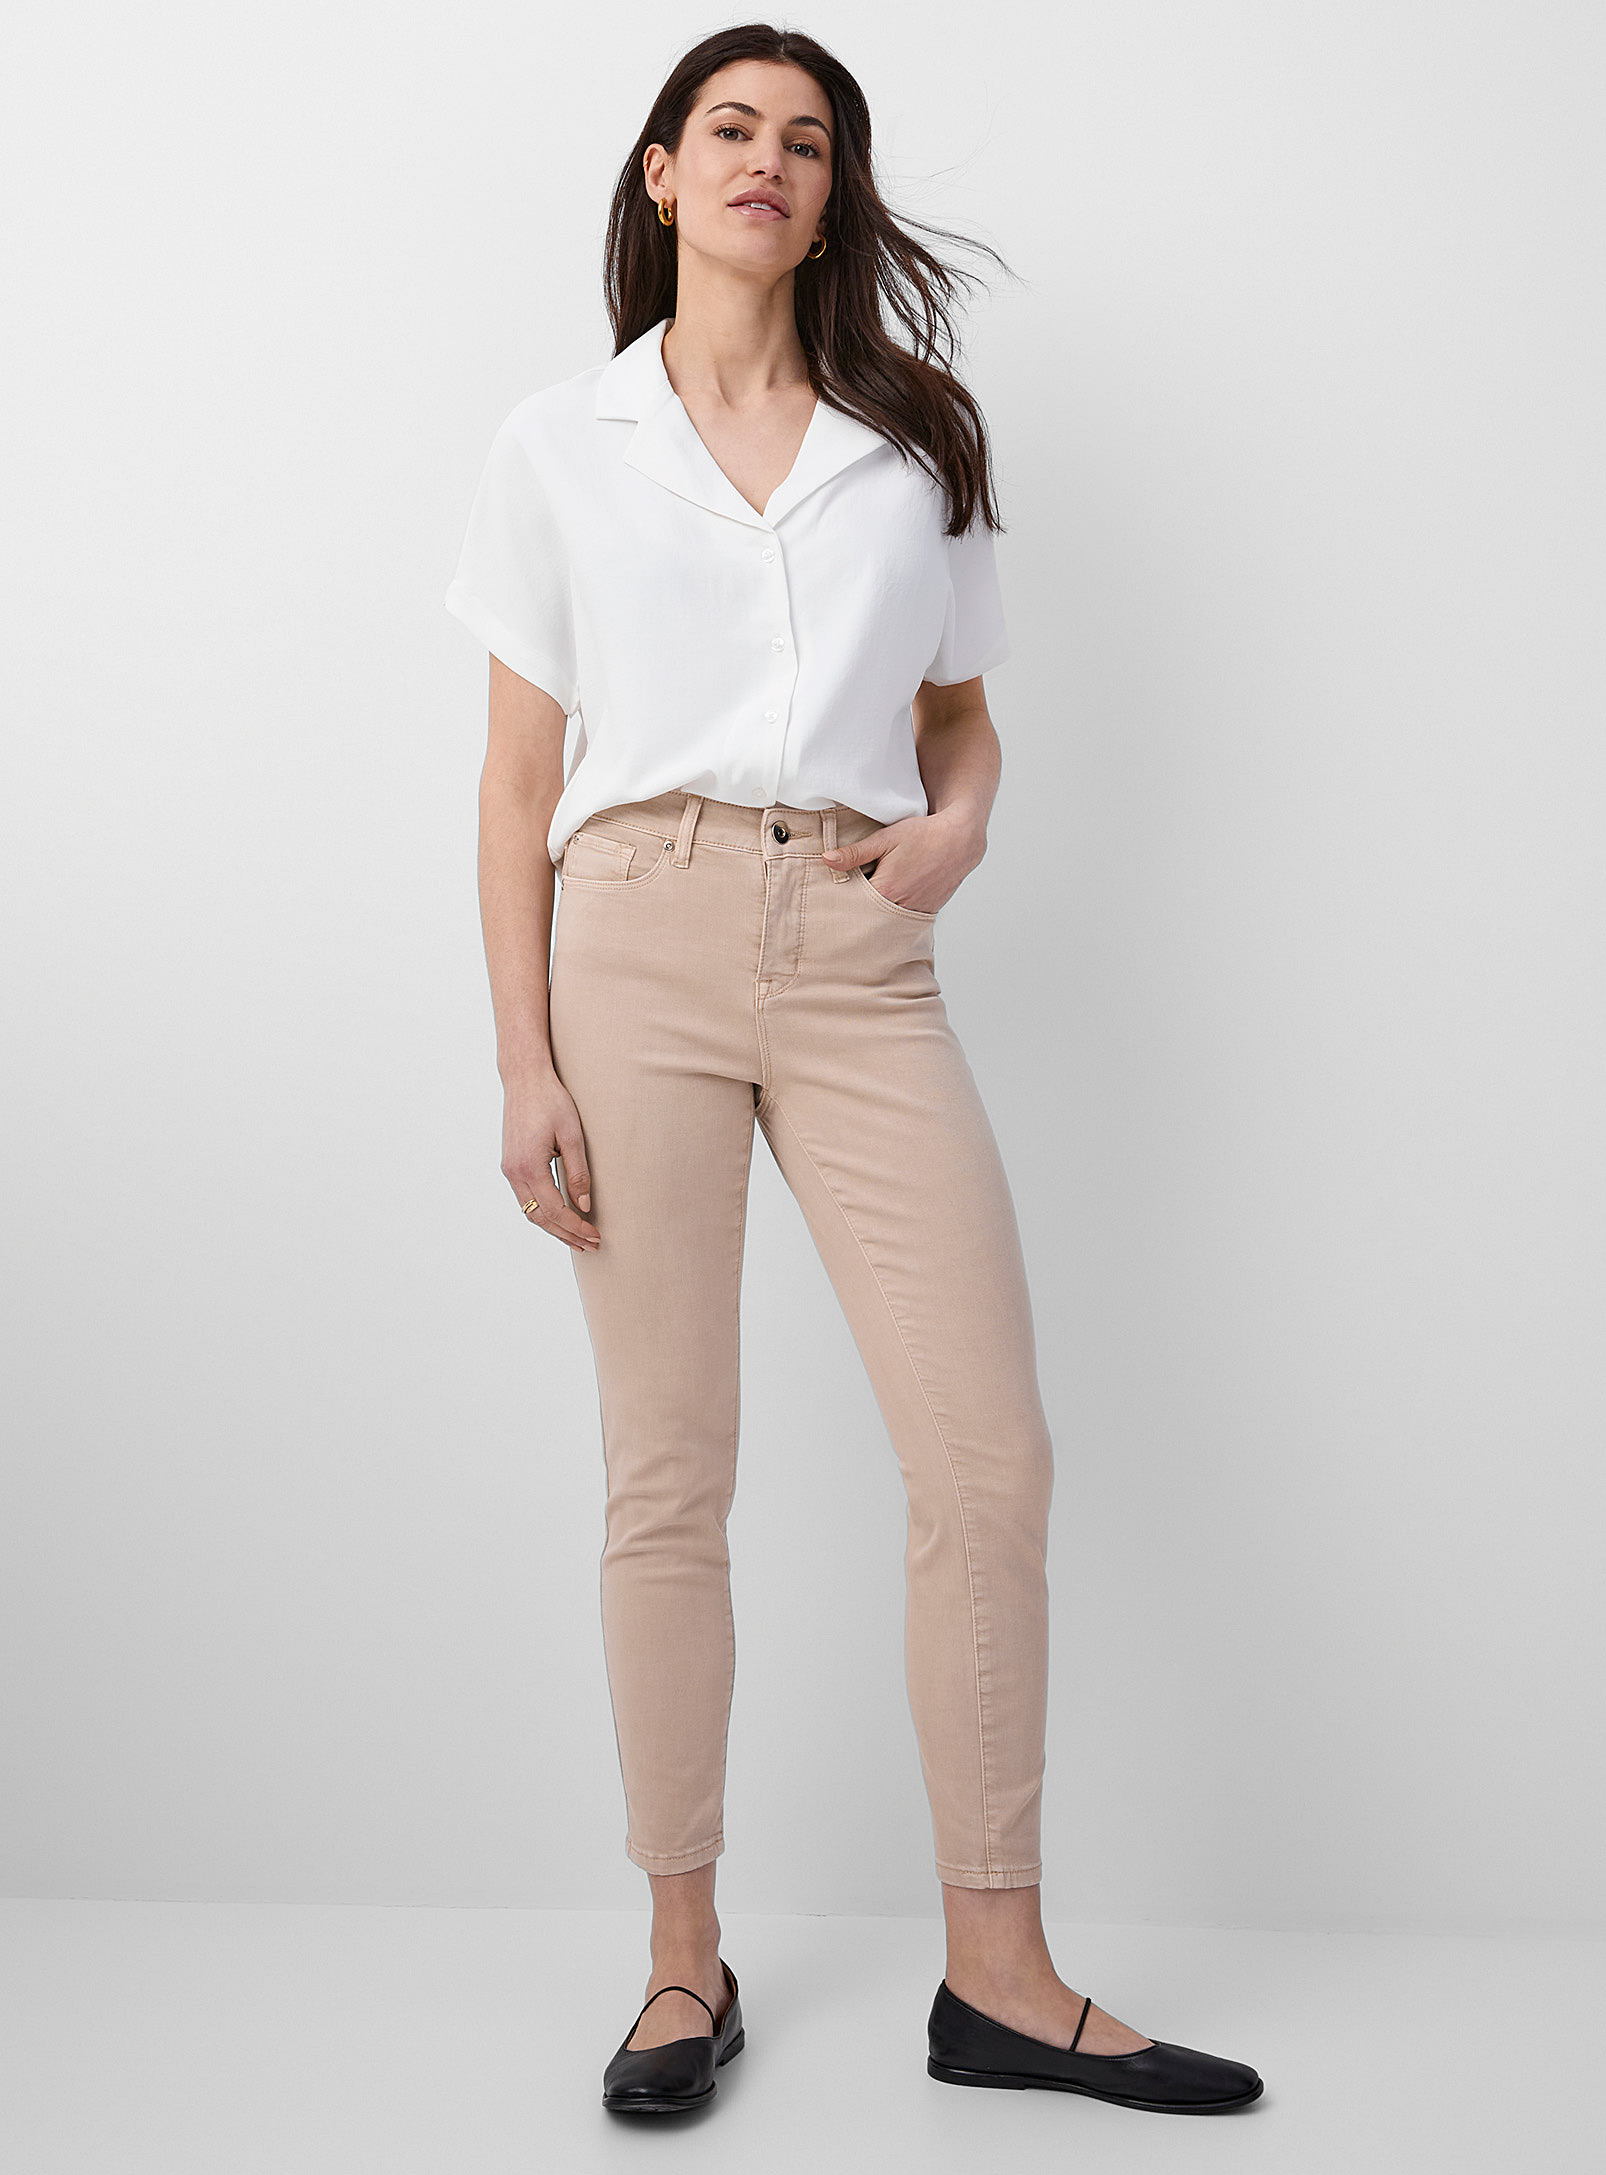 Contemporaine Natural Tone Fitted Jean In Sand